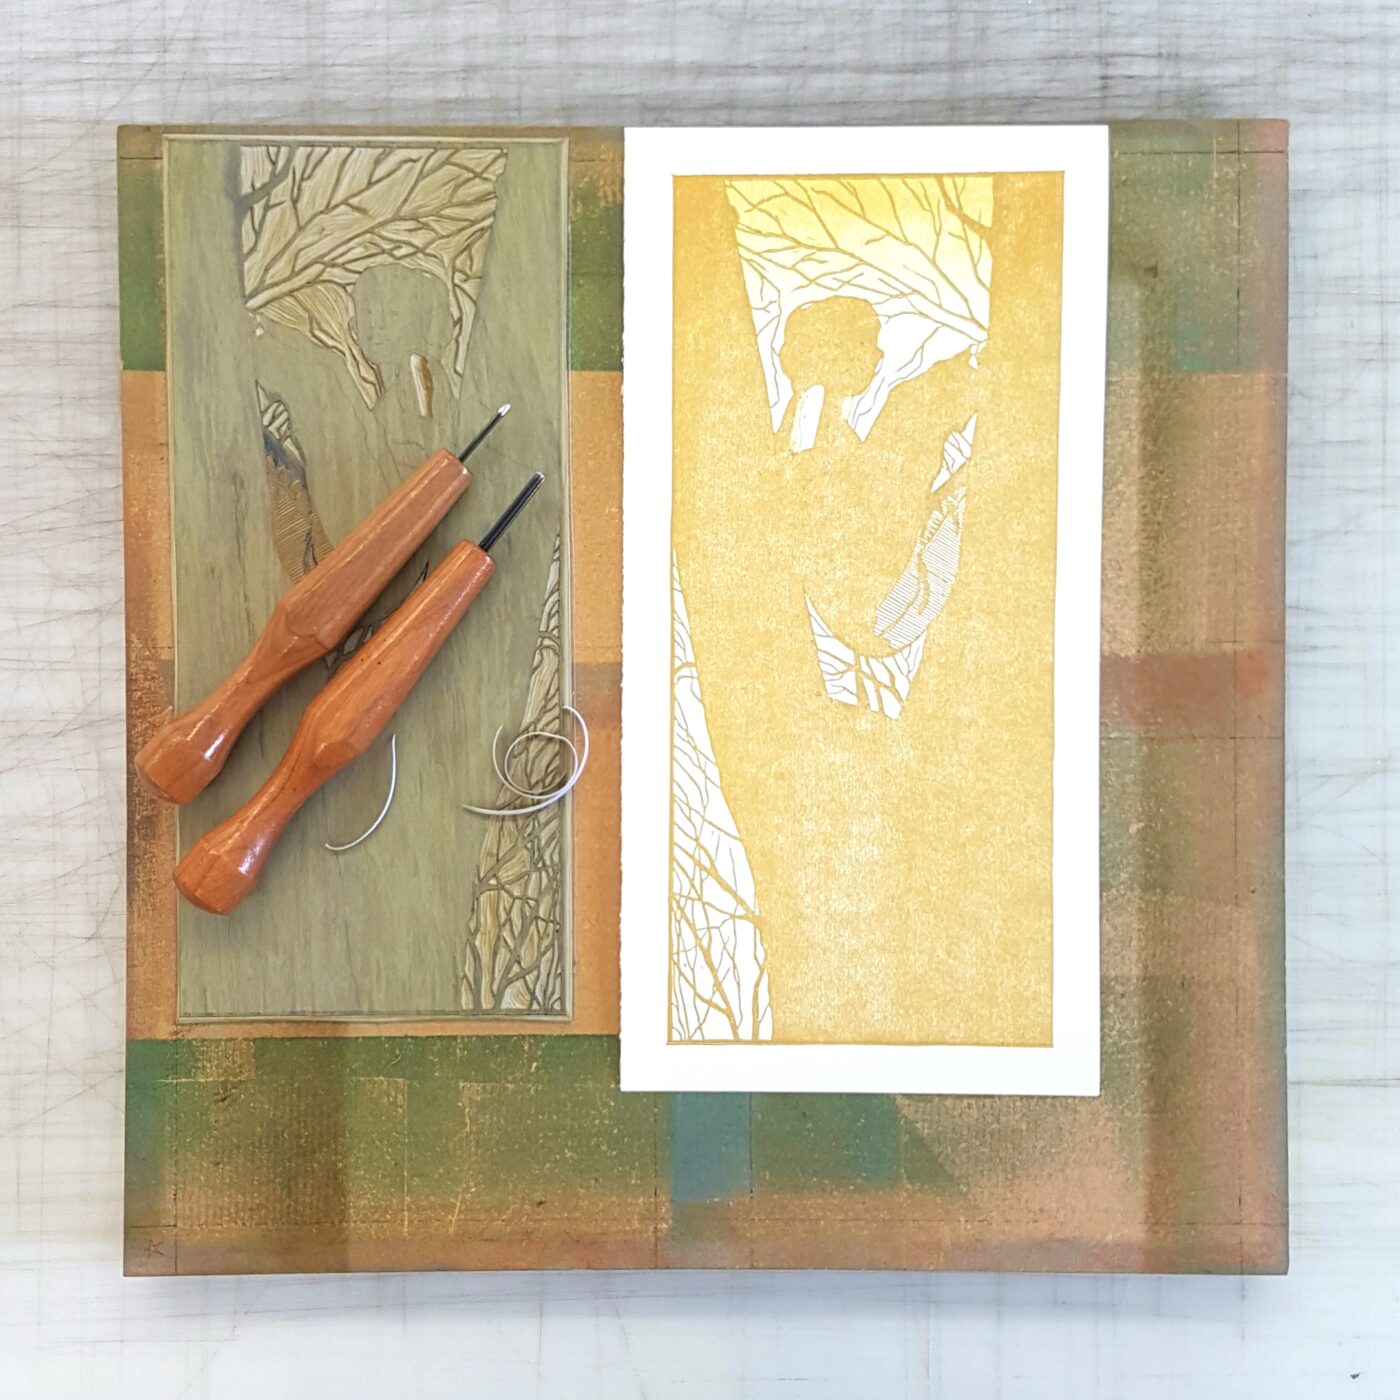 a letterpress block and a proof of the image, depicting a person perched on a leafless tree